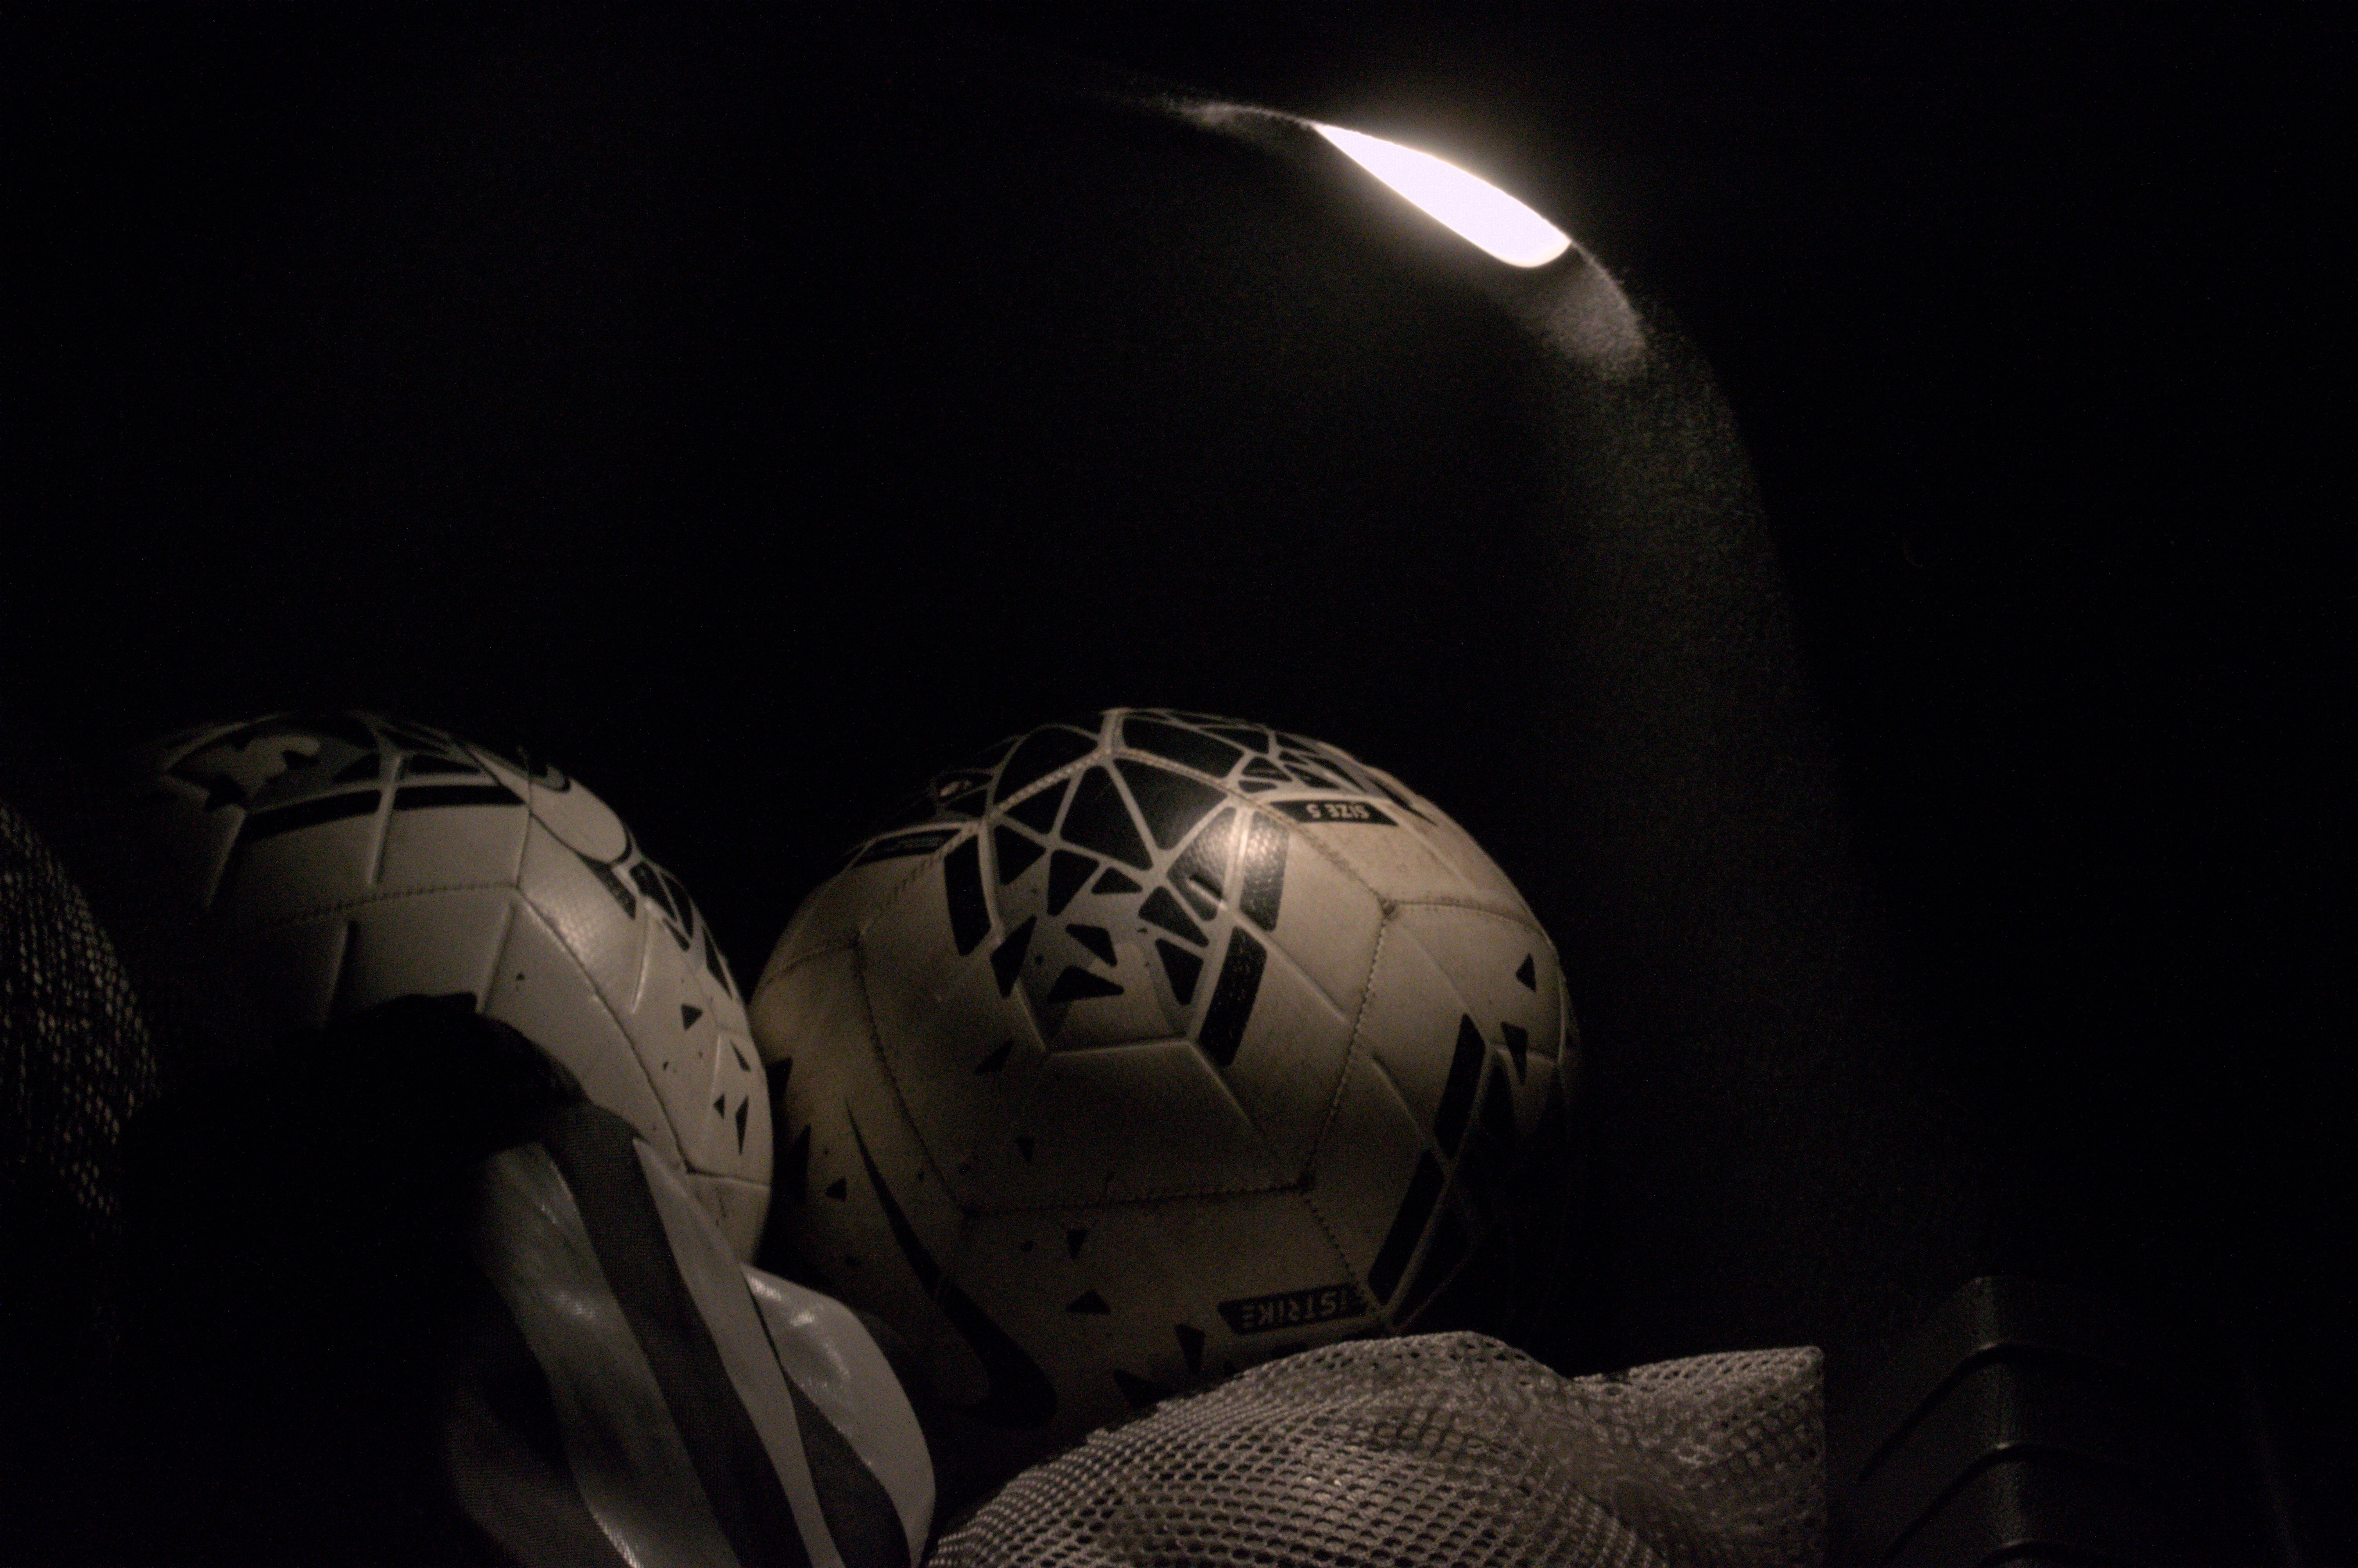 Photo of several soccerballs in a trunk of a car with a single warm light illuminating them